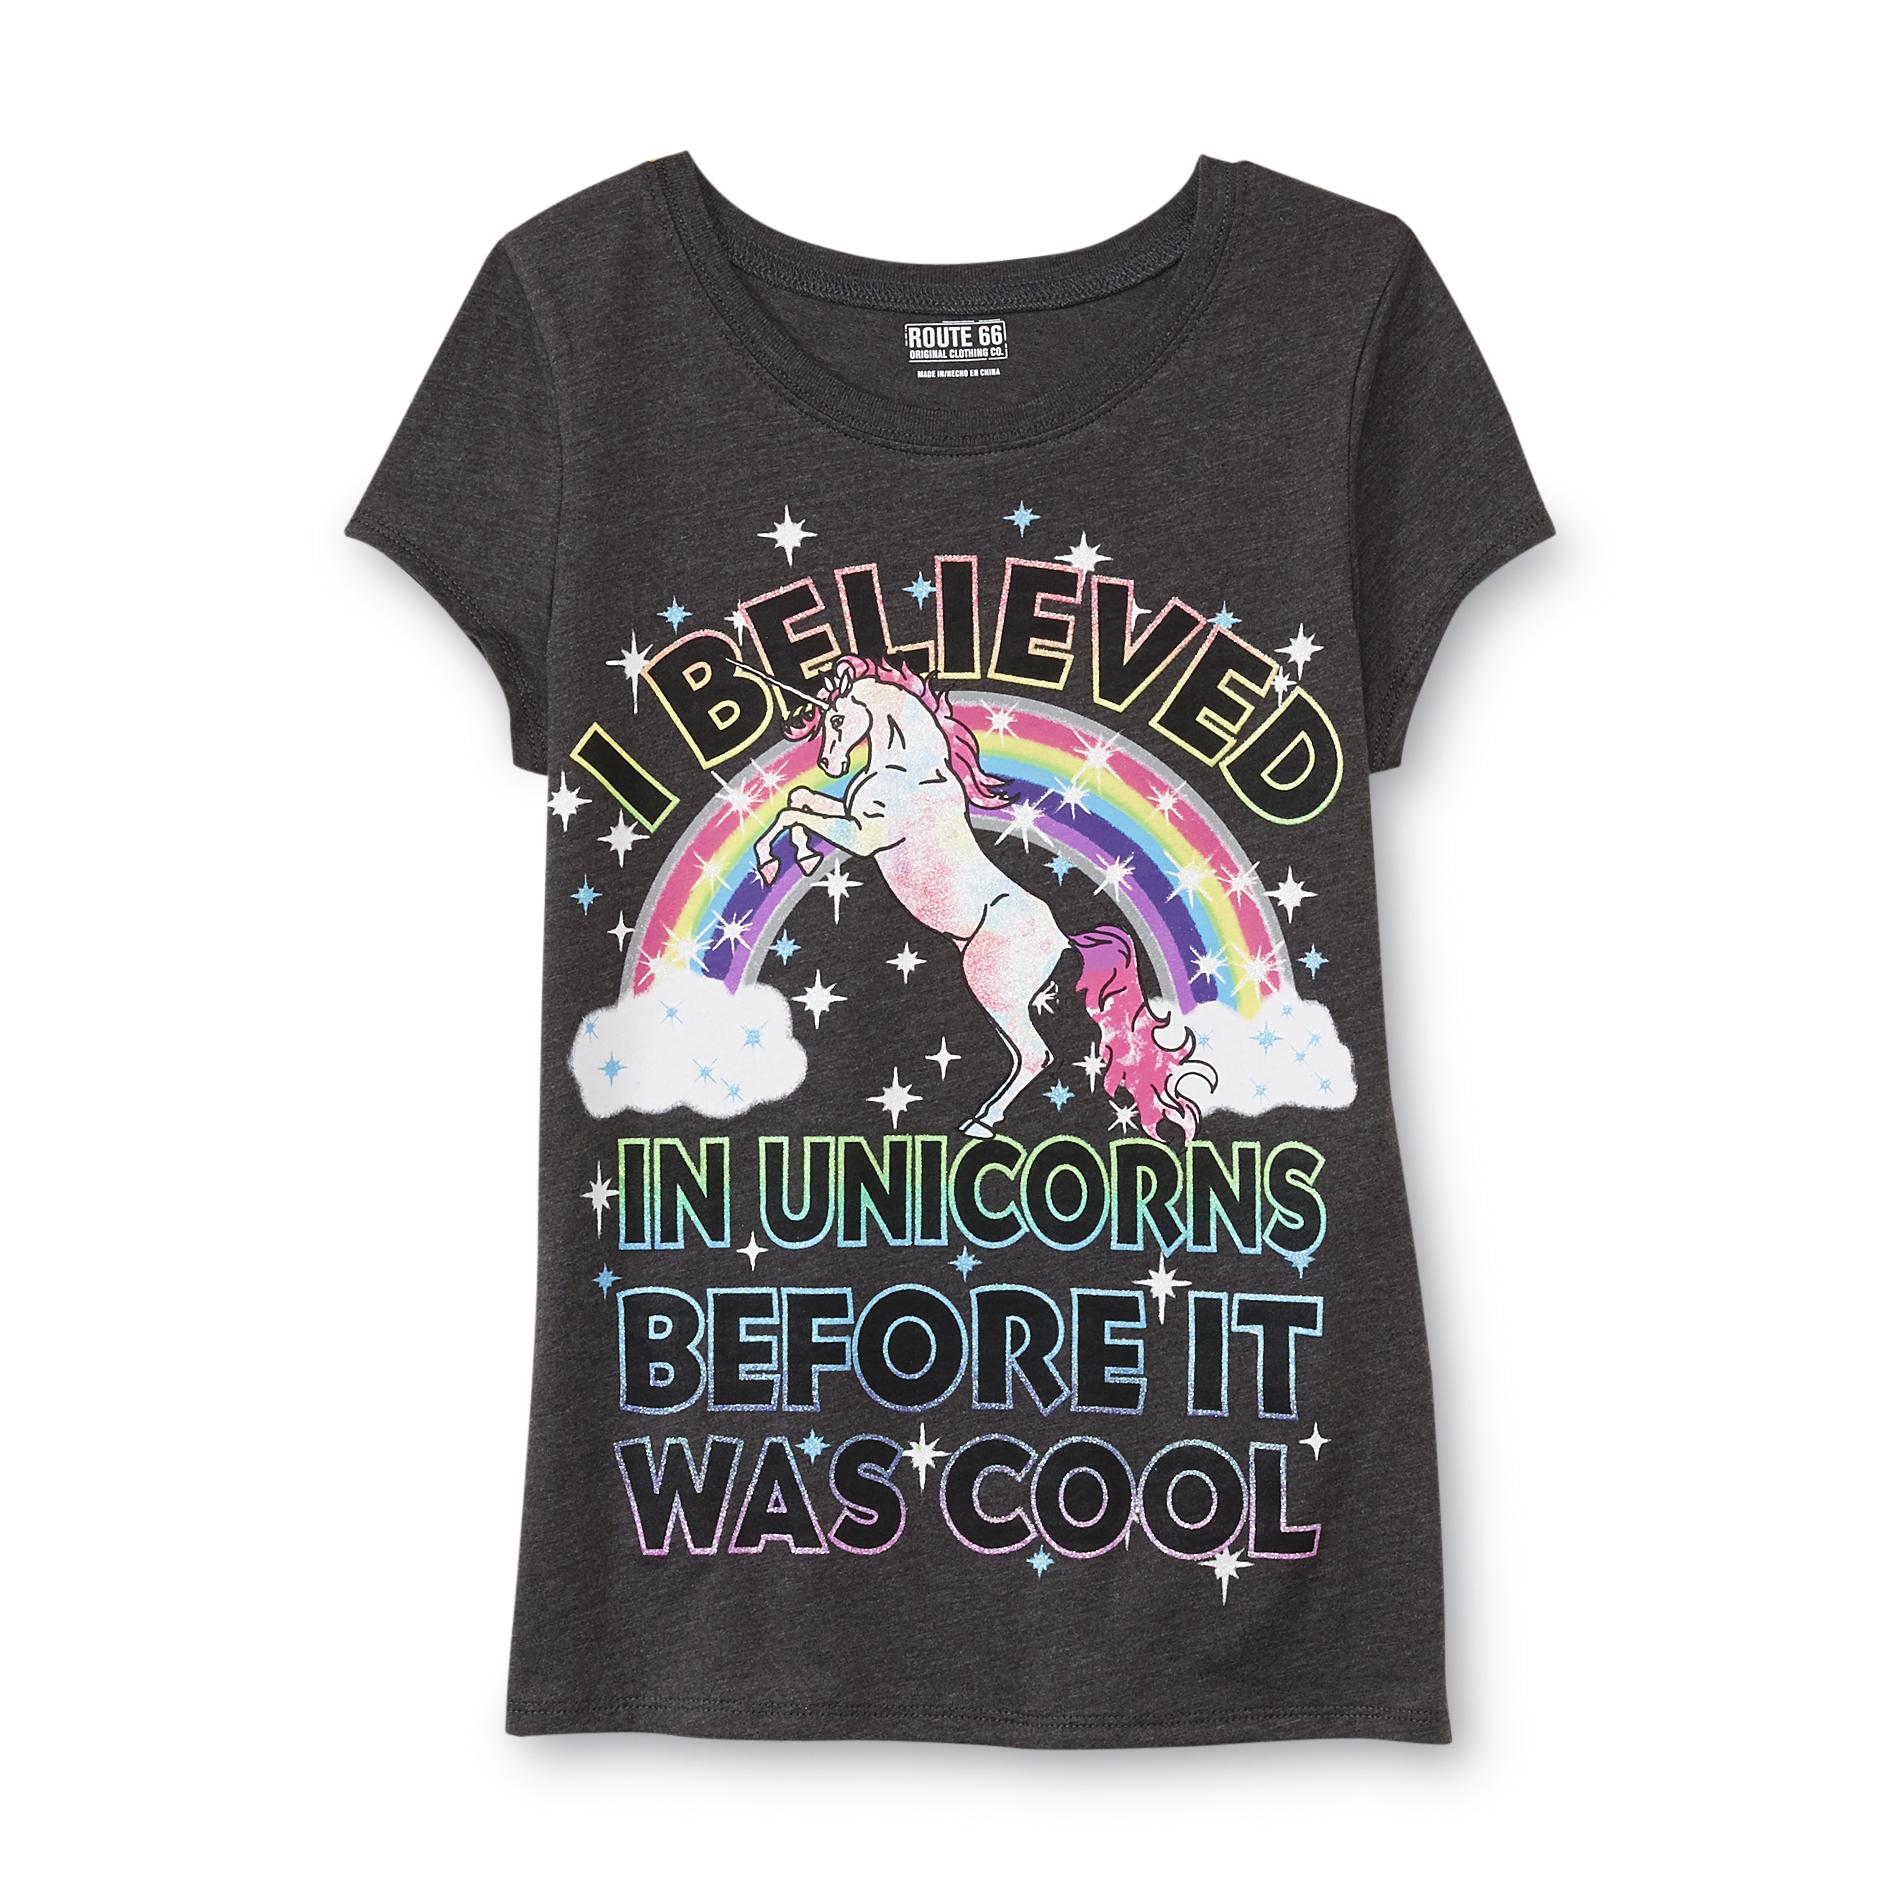 Route 66 Girl's Graphic T-Shirt - Believe In Unicorns